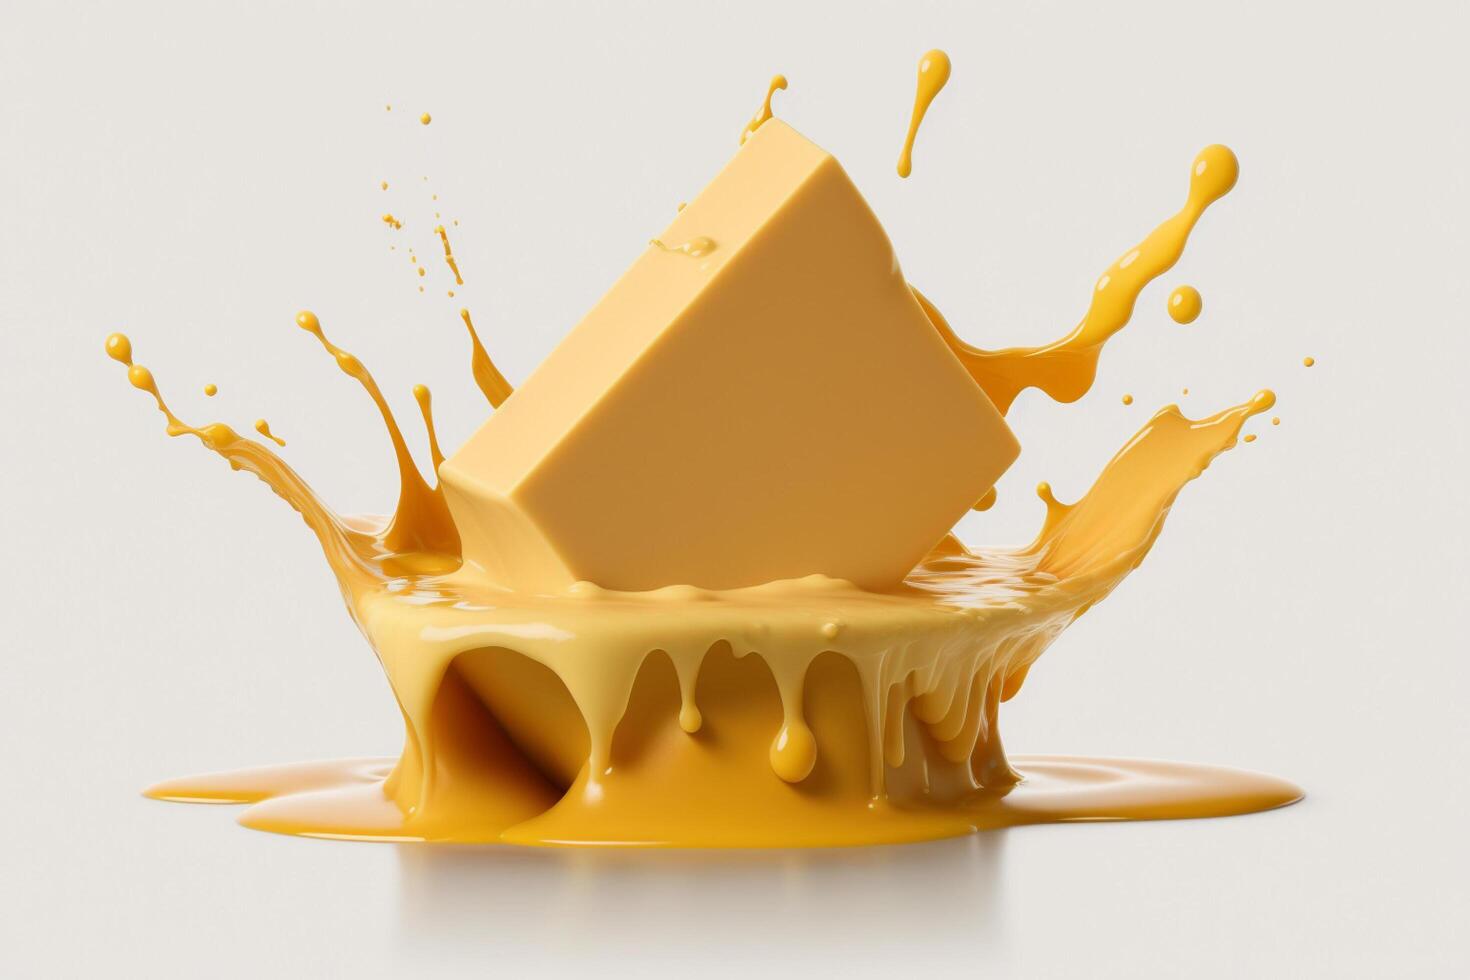 A delicious melting cheese splash in a realistic style. Hot cheese or cheddar splash. Tasty cheese liquid splash. Cheese sauce crown splash. For italian food, world cheese day, dessert by photo